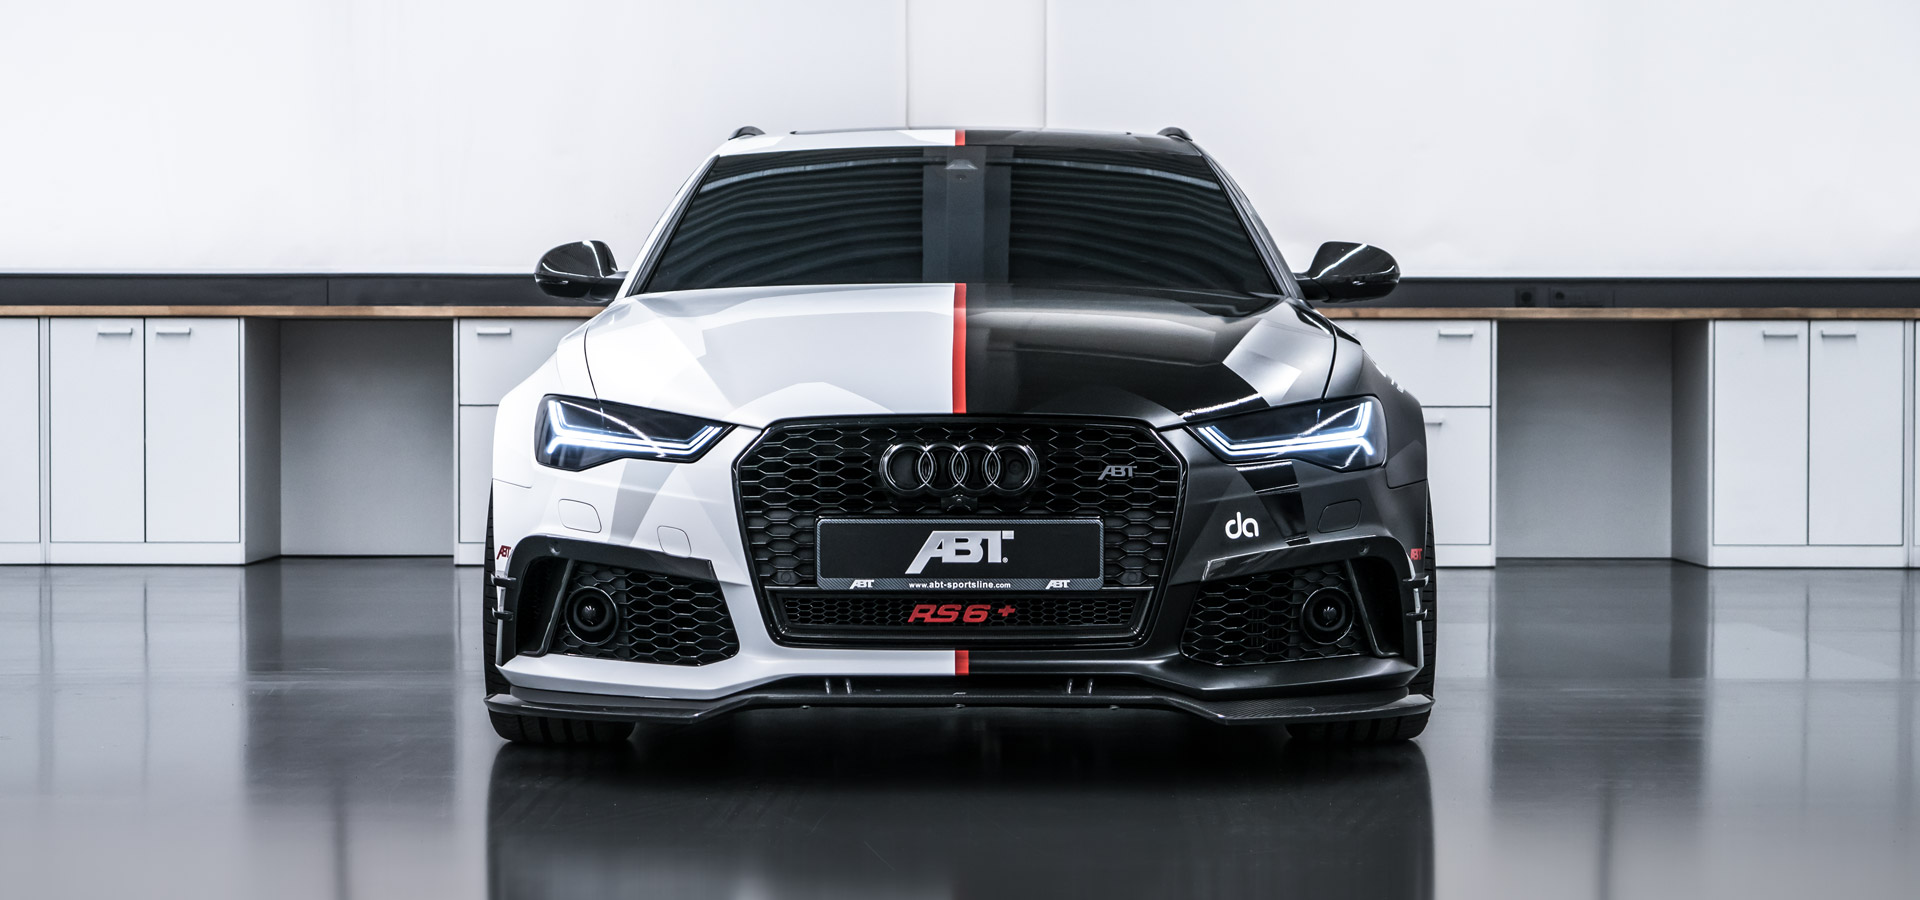 Unique projects - Audi Tuning, VW Tuning, Chiptuning von ABT Sportsline.